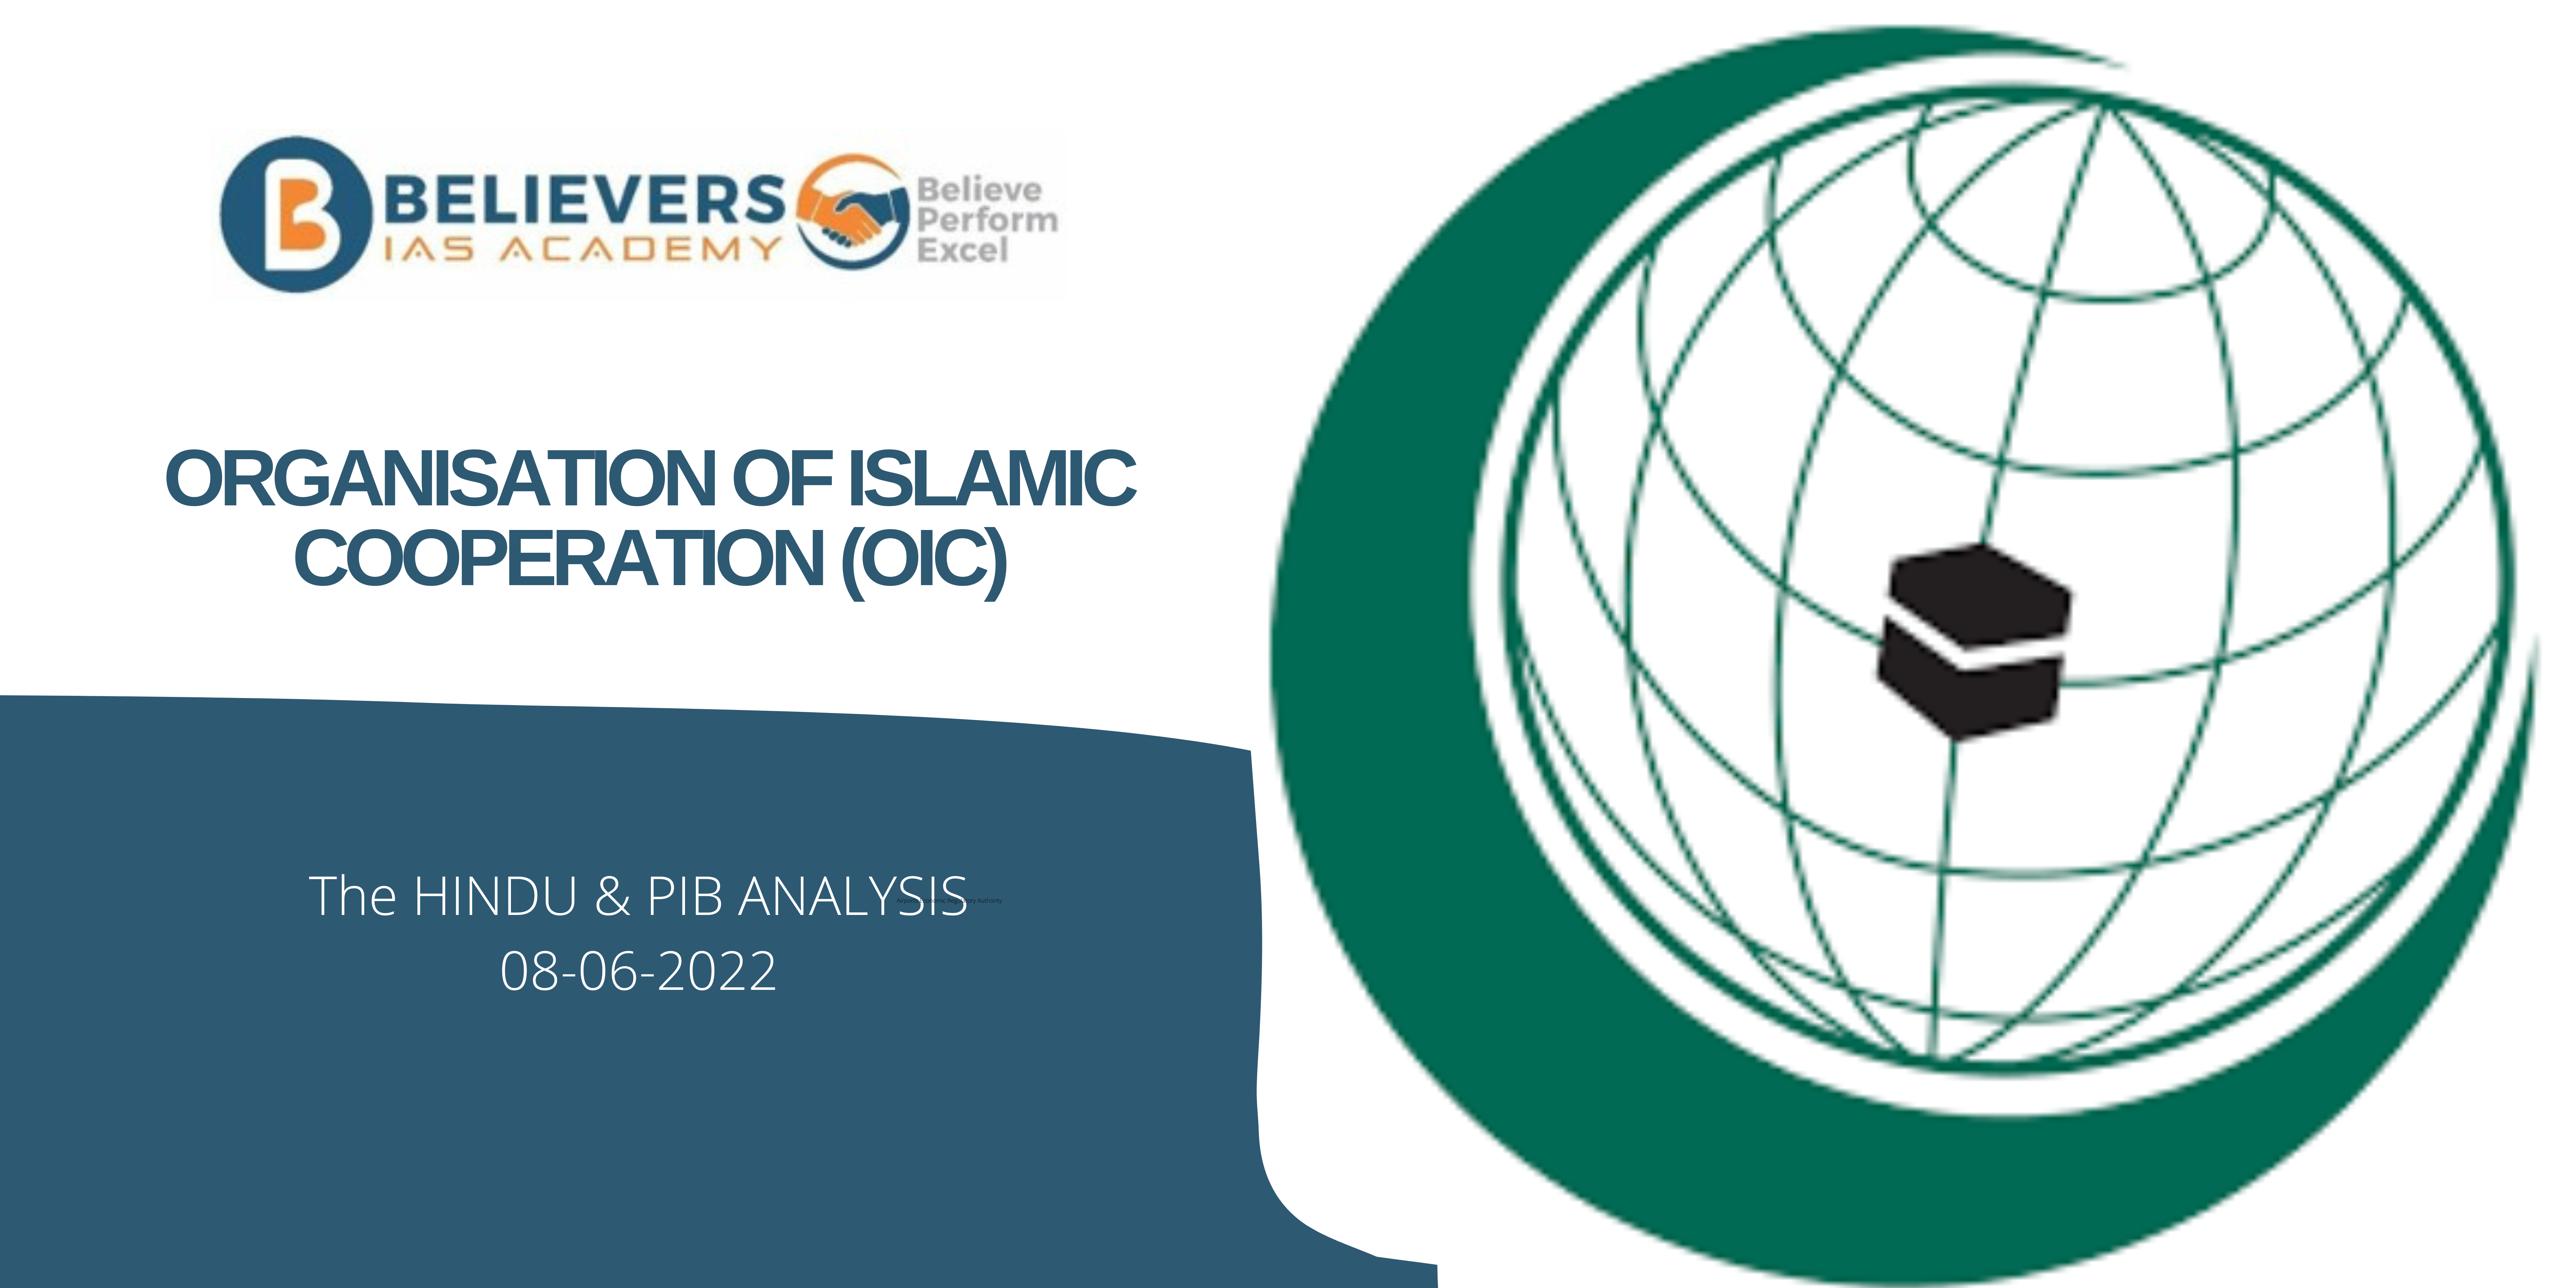 UPSC Current affairs - Organisation of Islamic Cooperation (OIC)